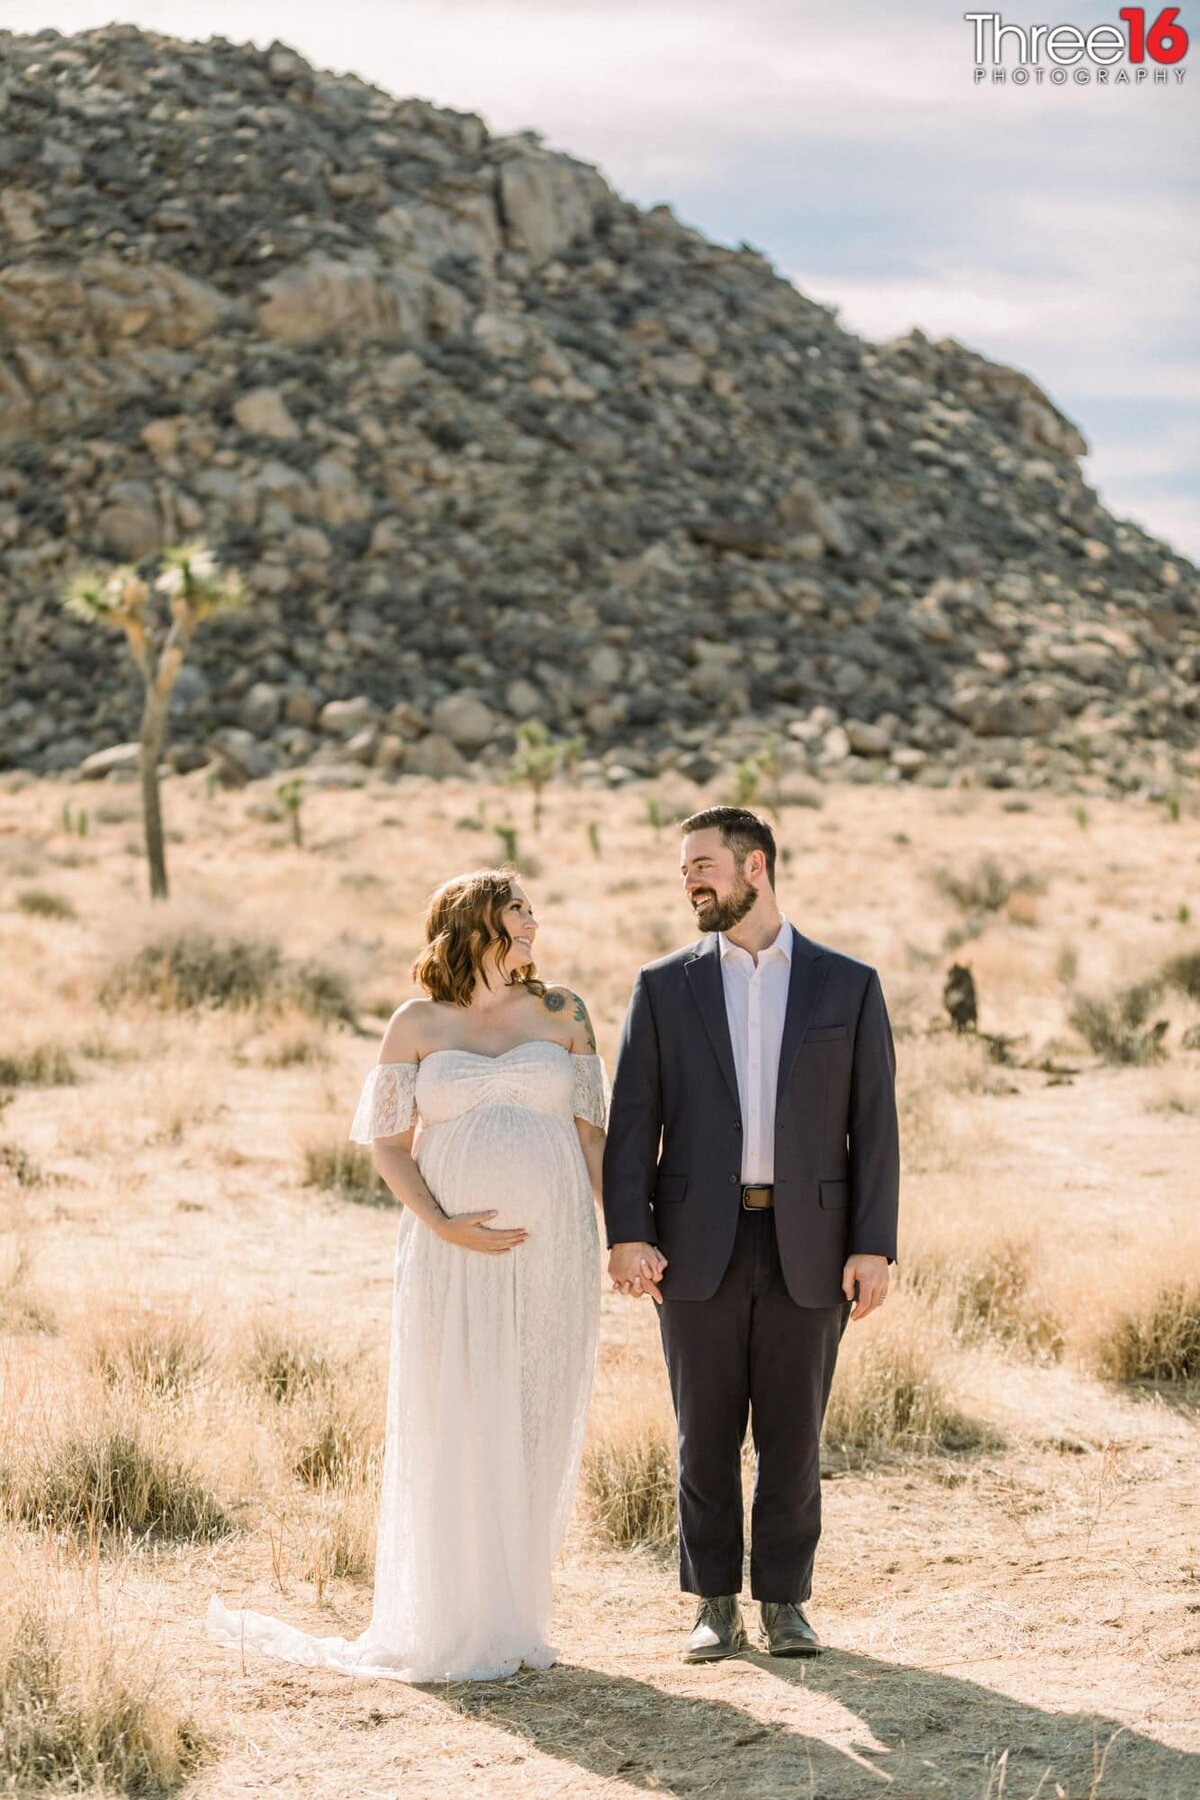 Husband and Wife hold hands during their maternity photo session